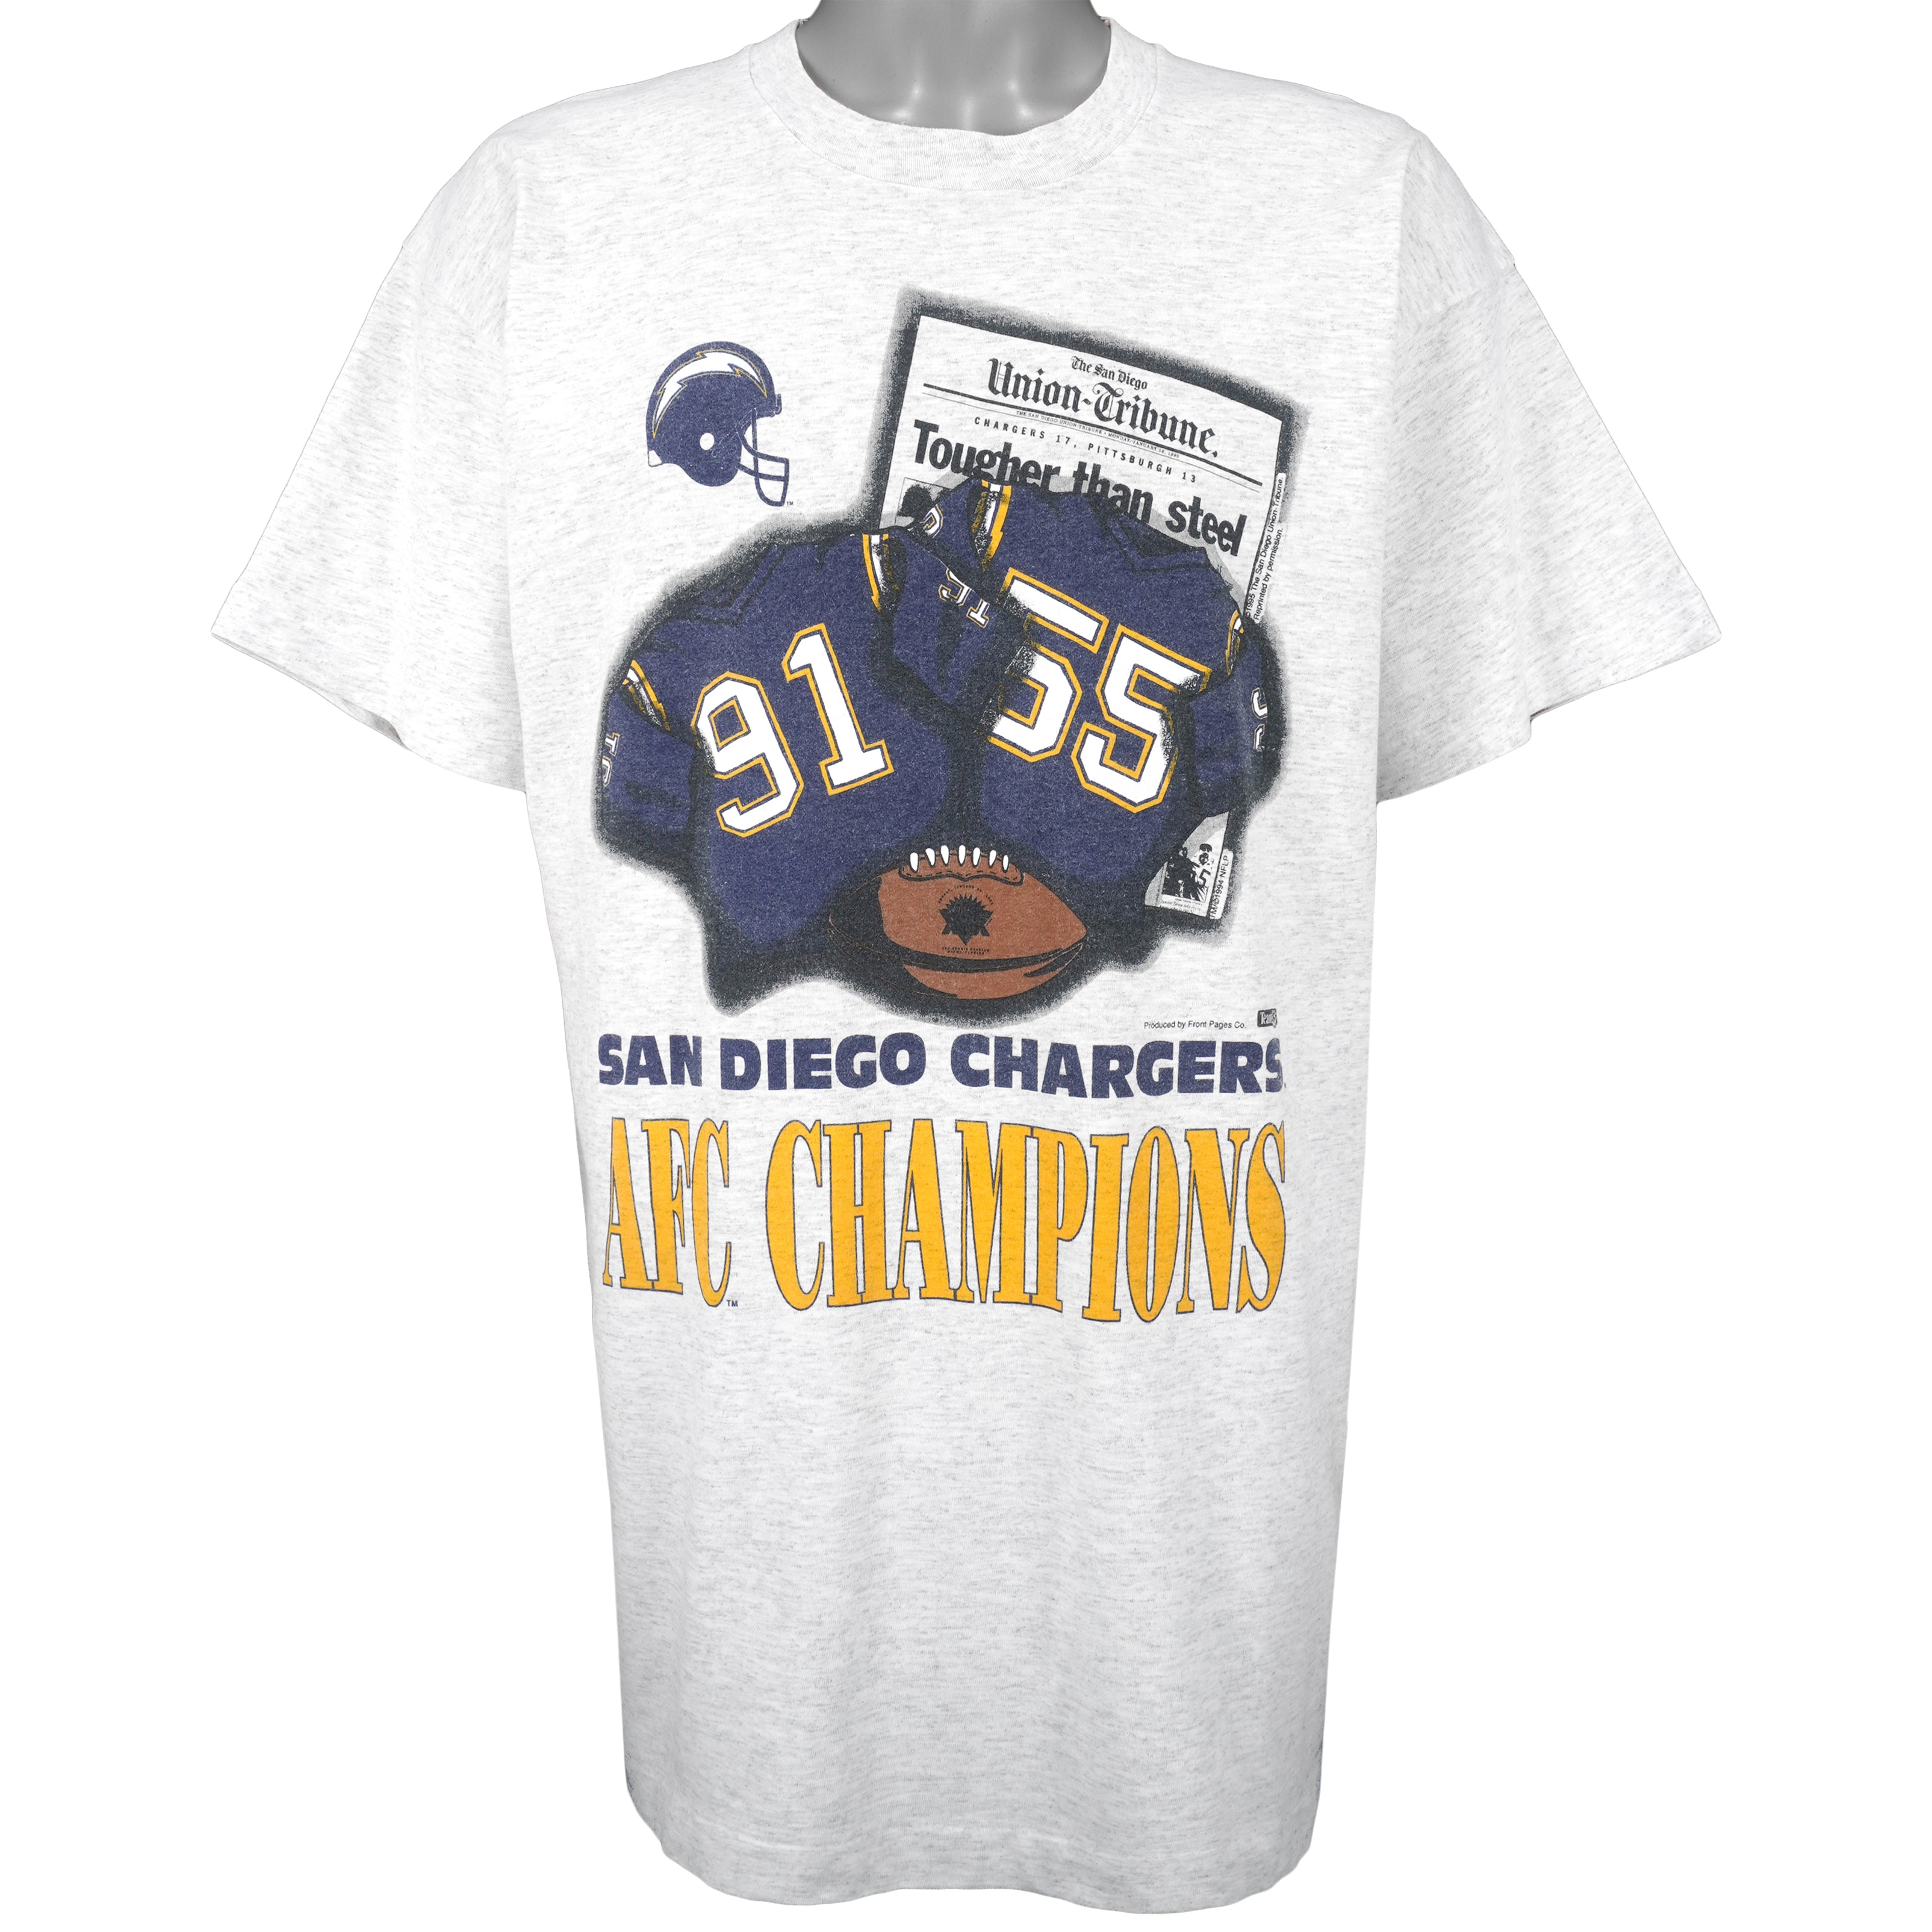 San Diego Chargers T-shirt